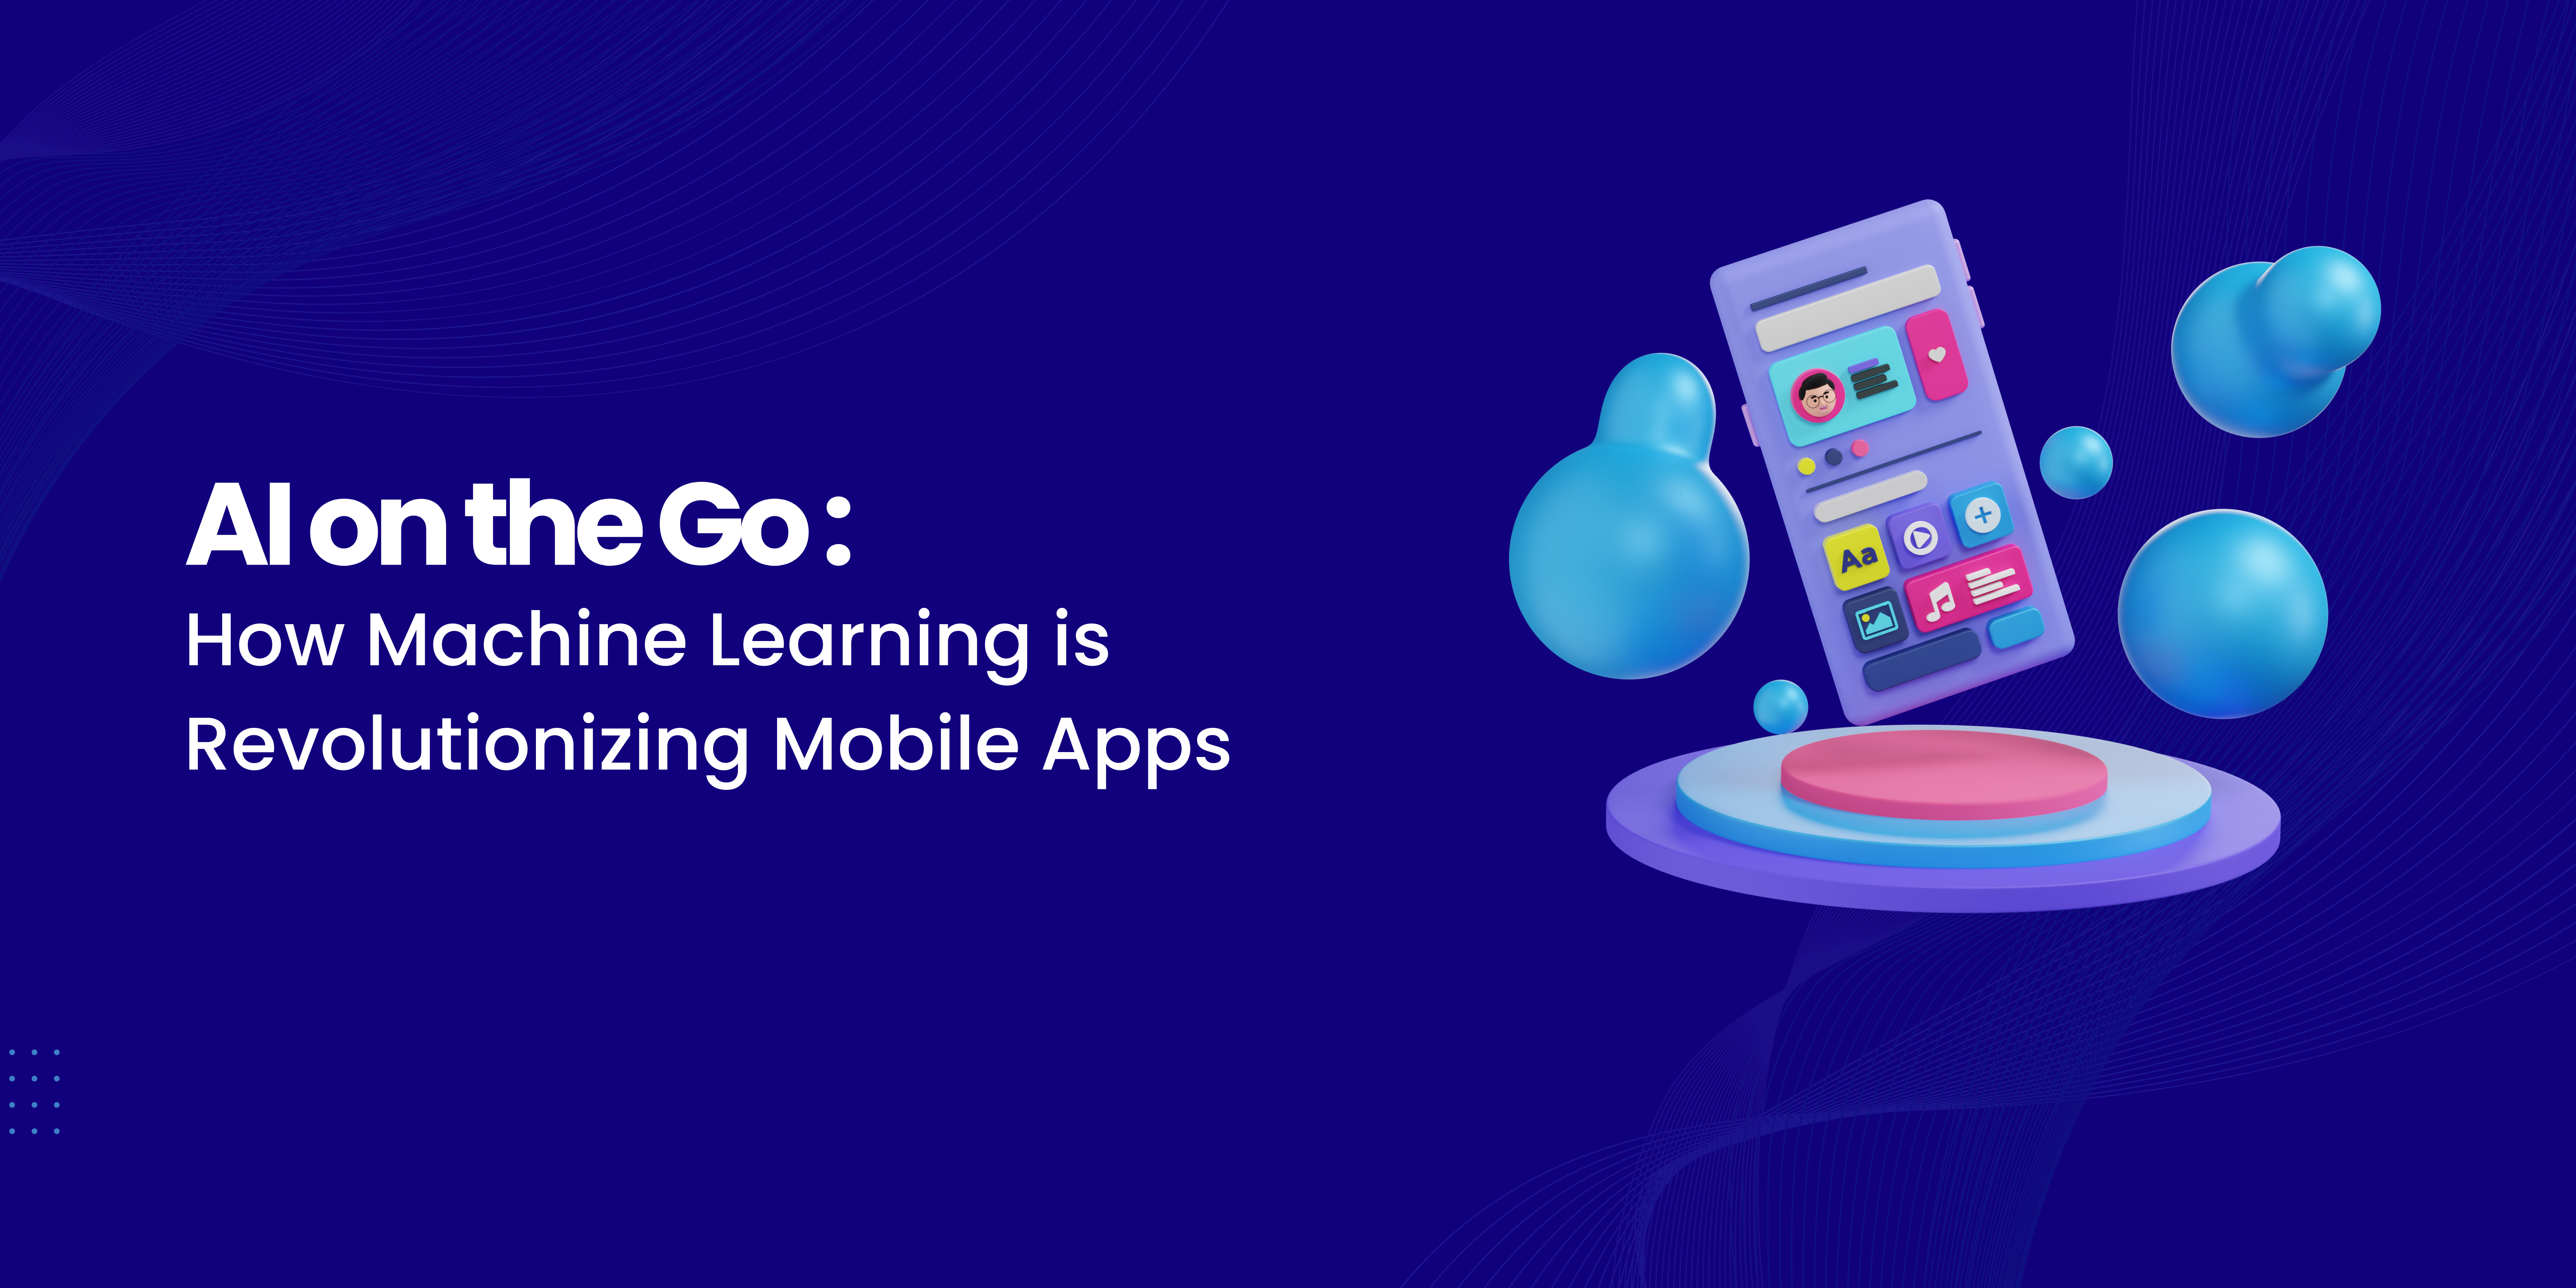 Ai on the Go How Machine Learning is Revolutionizing Mobile Apps